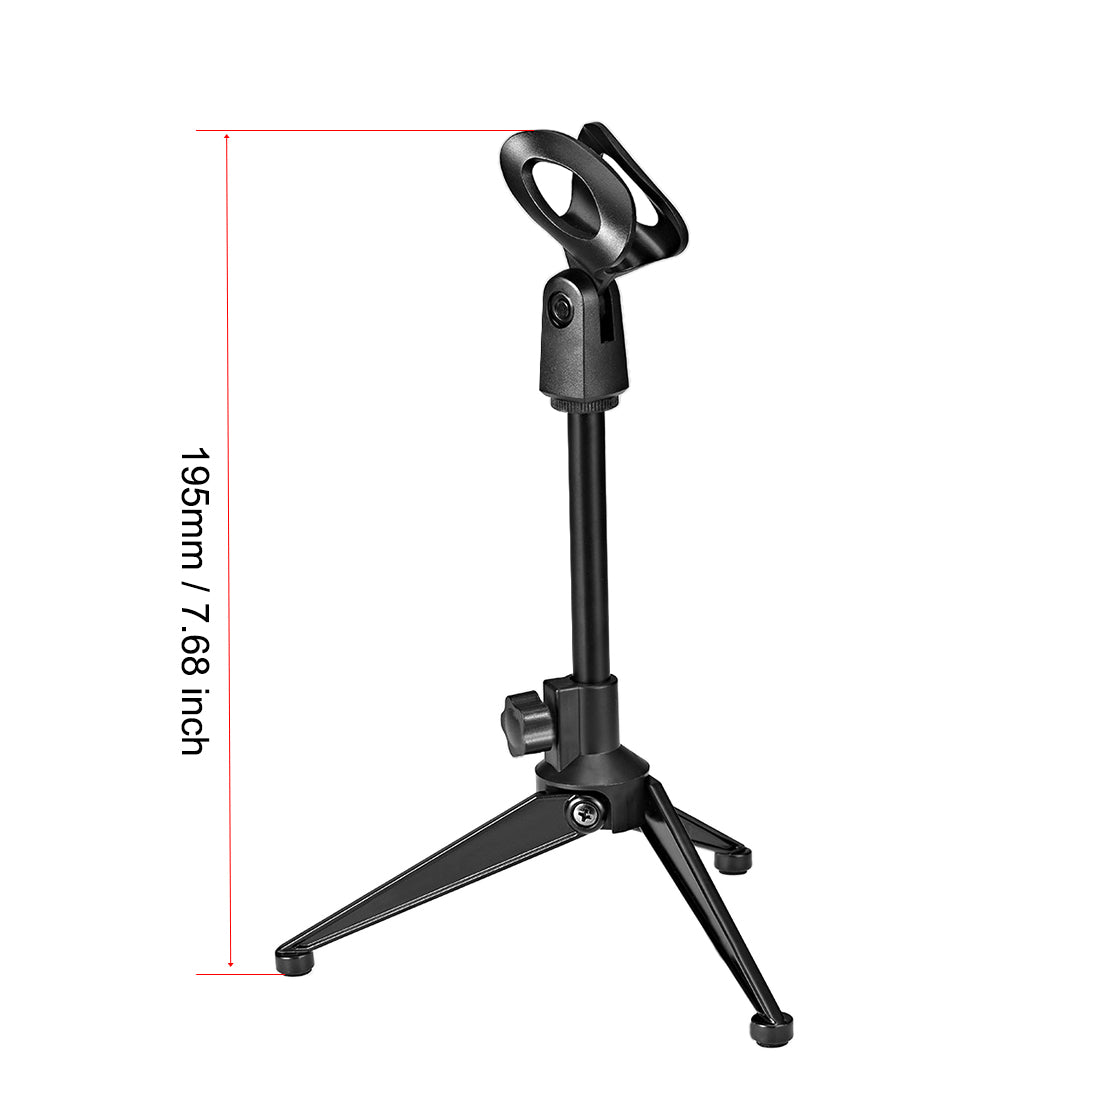 uxcell Uxcell 2pcs Adjustable Desktop Microphone Stand Tripod Foldable Tabletop Stand Holder with Mic Clip